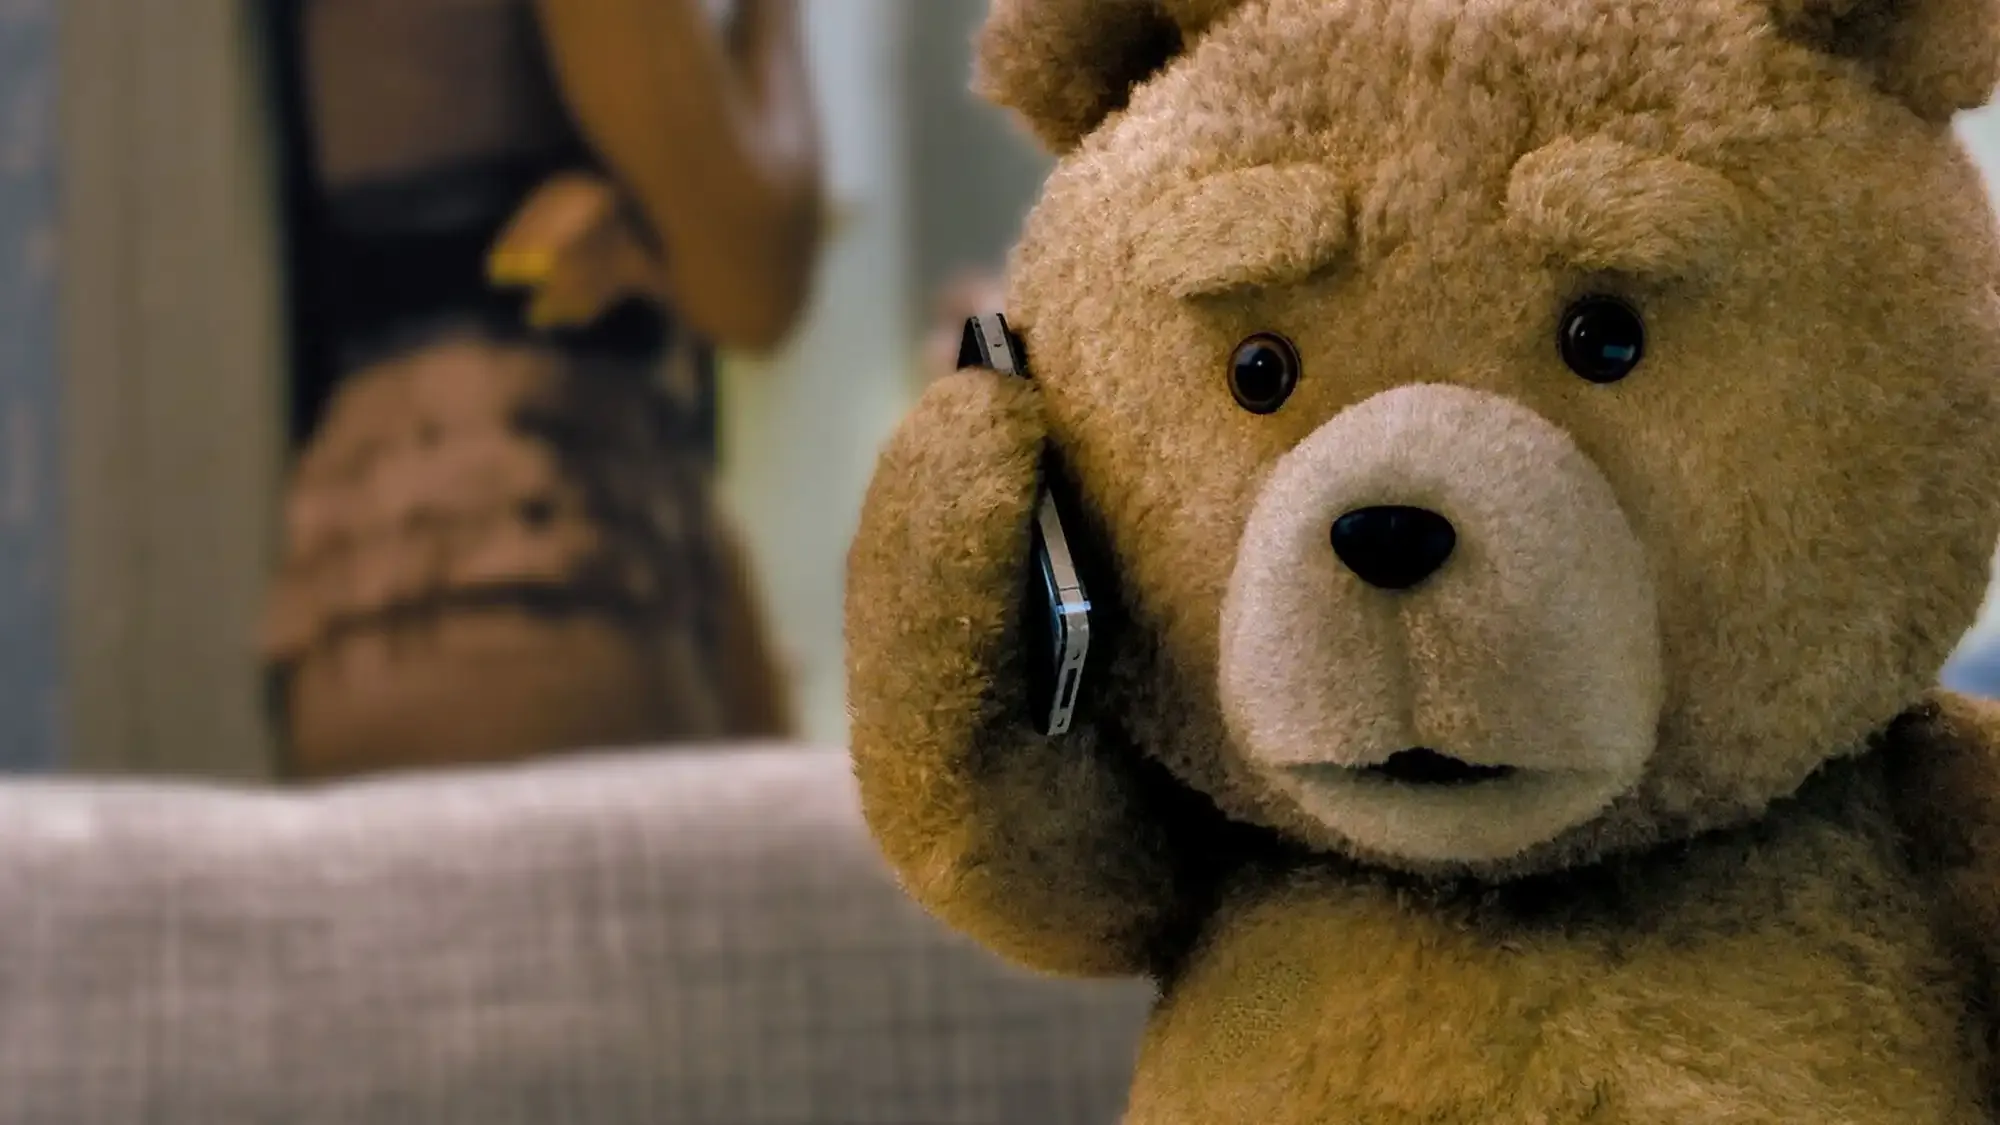 Ted movie review